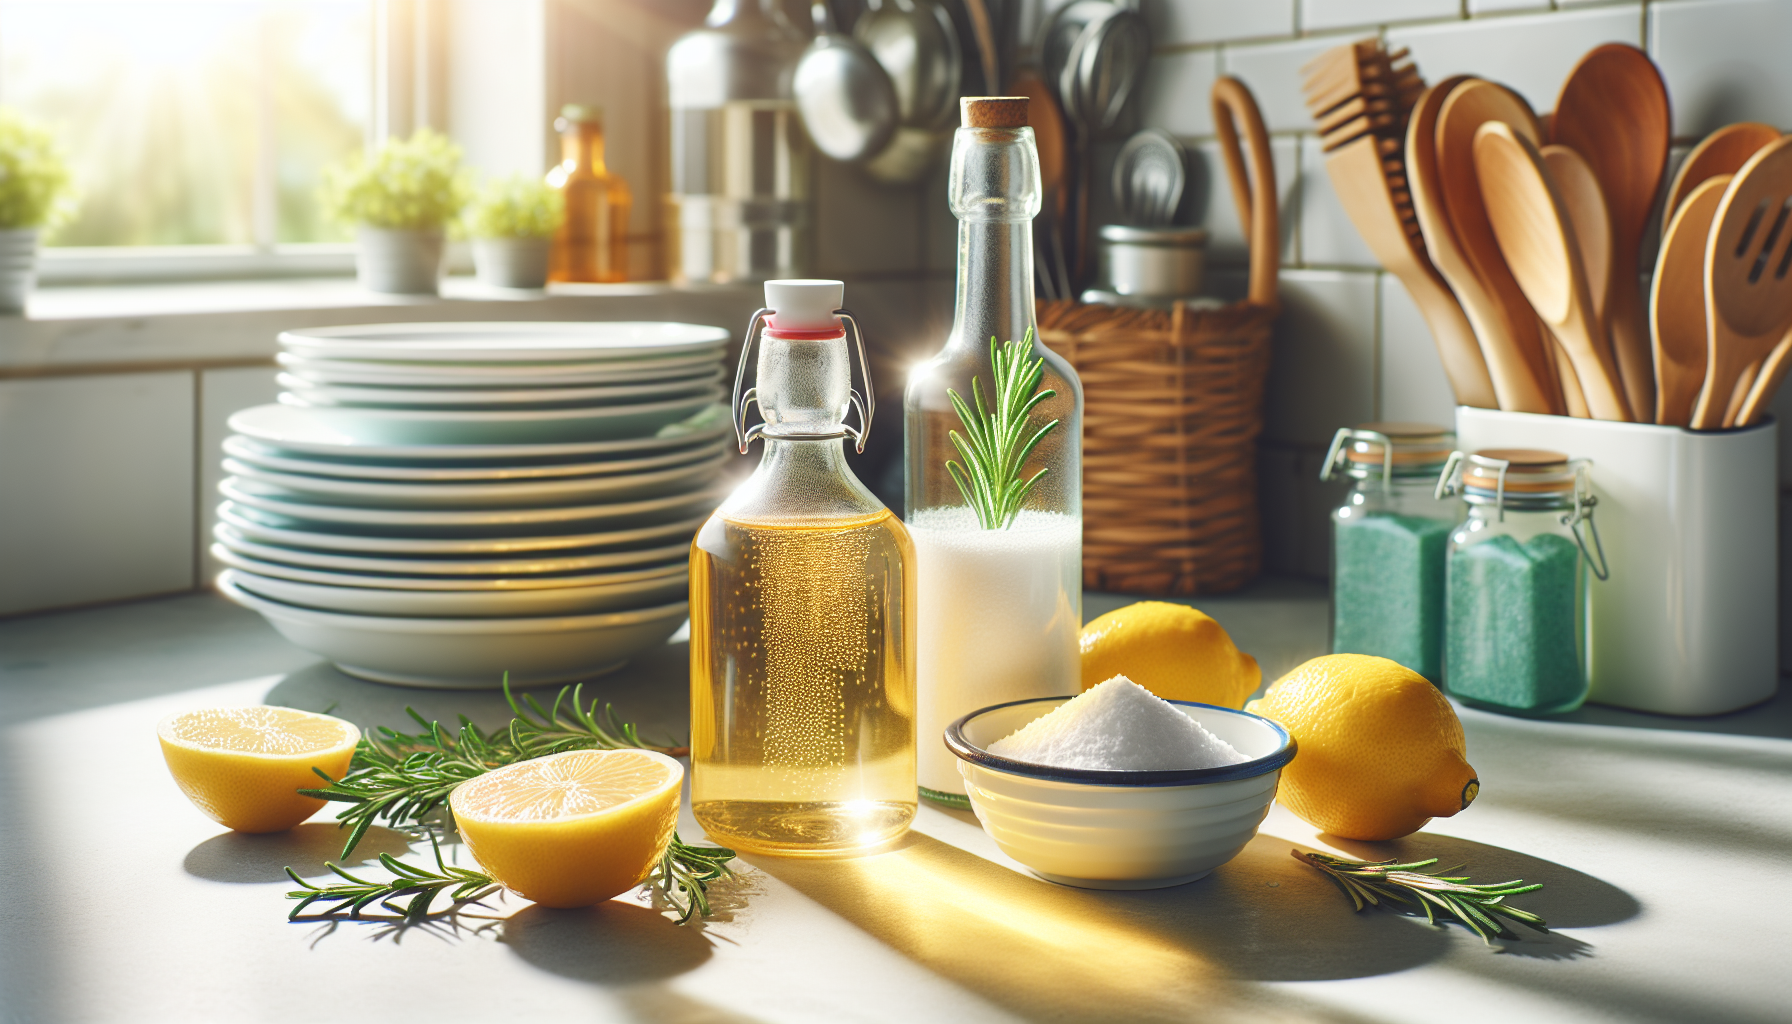 Discover the power of vinegar: your eco-friendly dish soap alternative